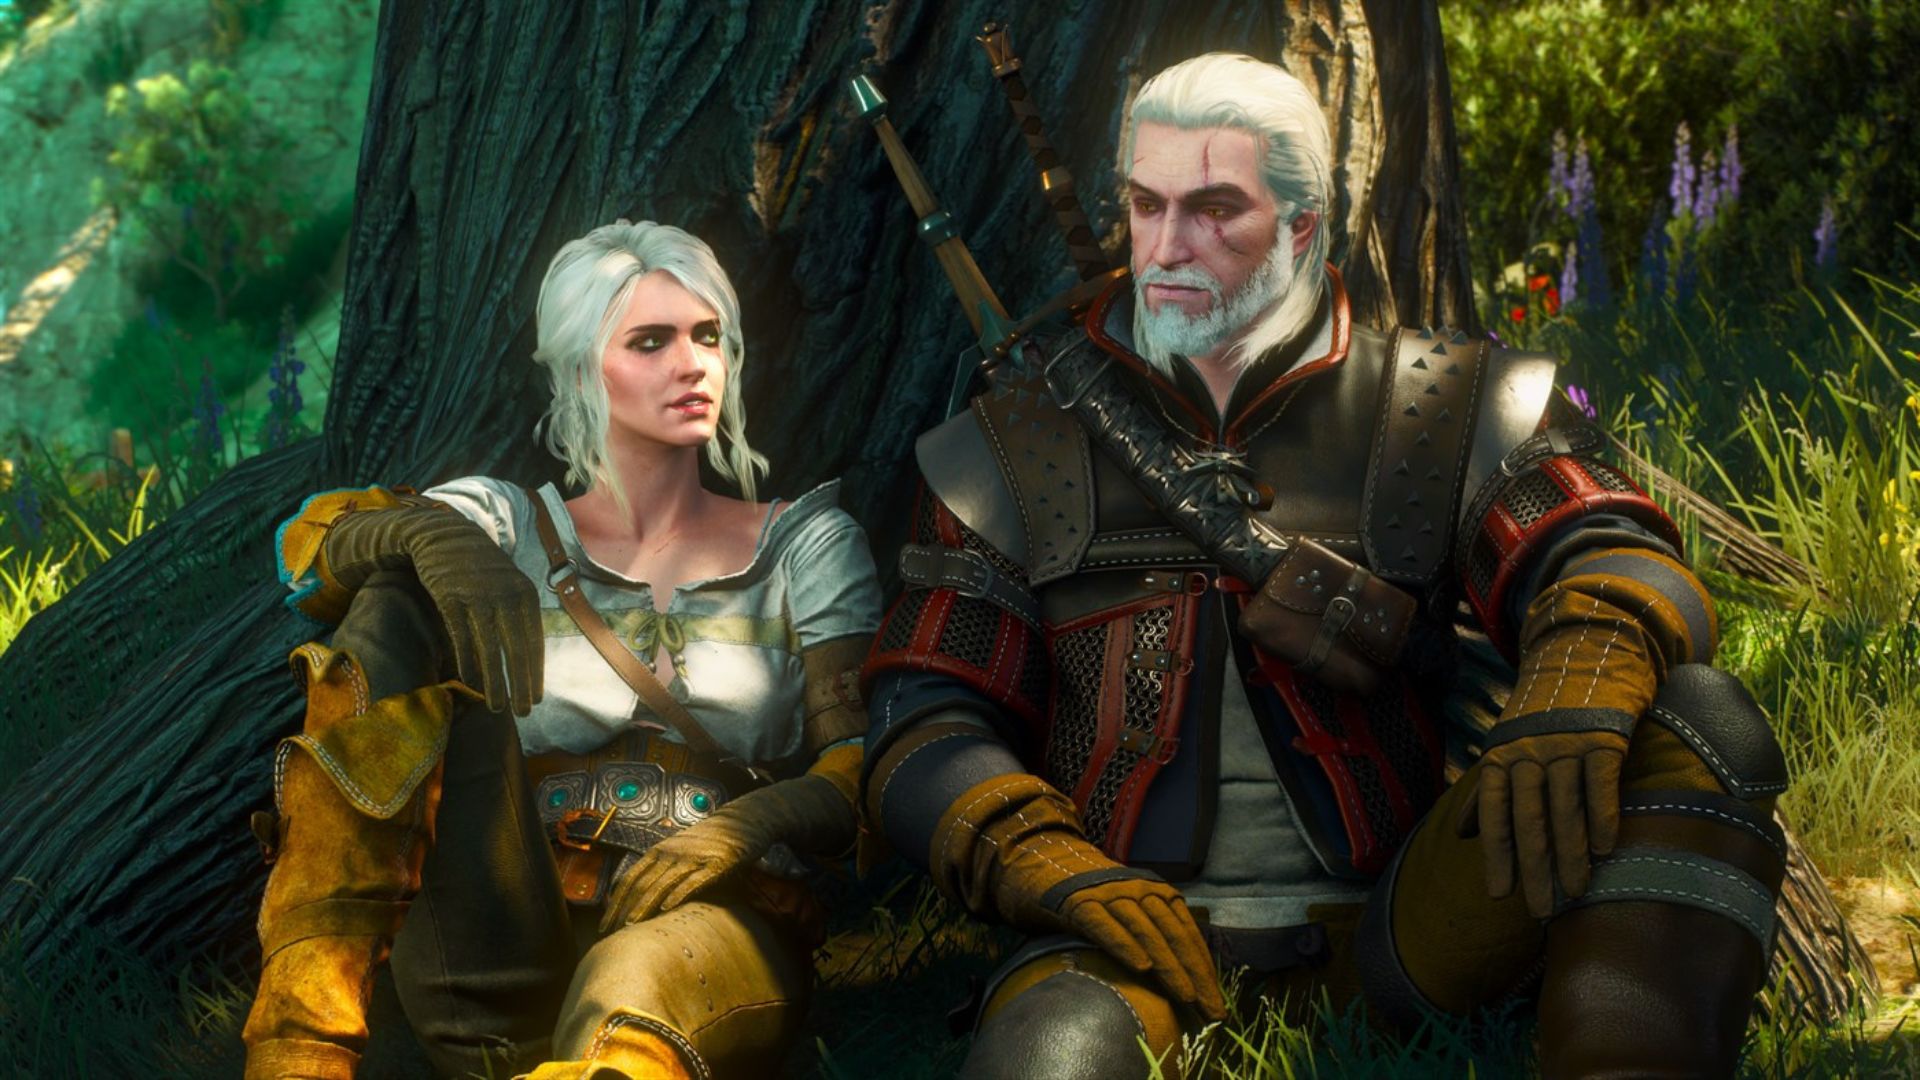 a-trecut-cur-c-elu-switch-the-witcher-3-pepene-hick-triciclet